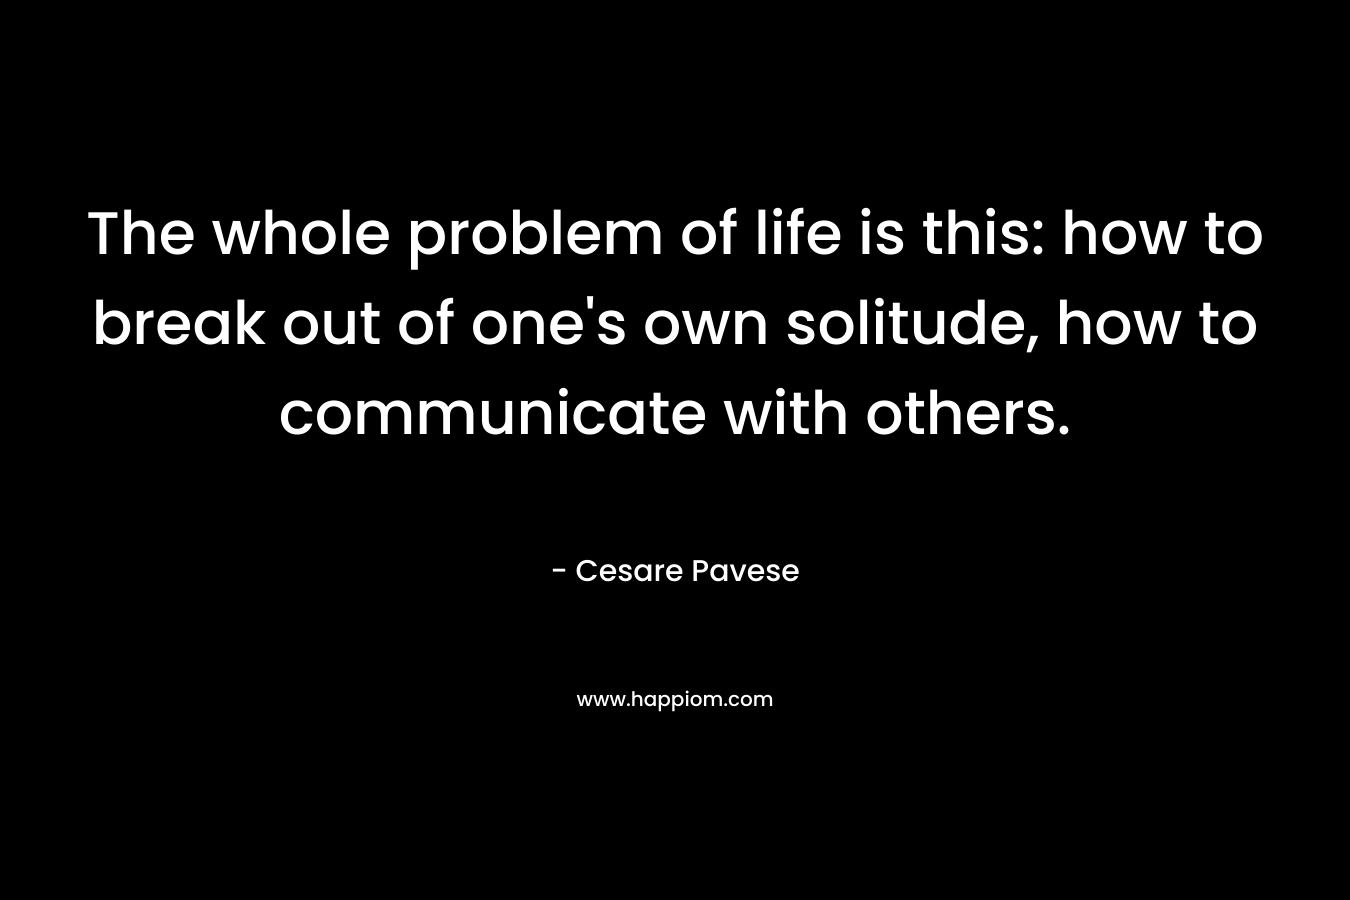 The whole problem of life is this: how to break out of one's own solitude, how to communicate with others.